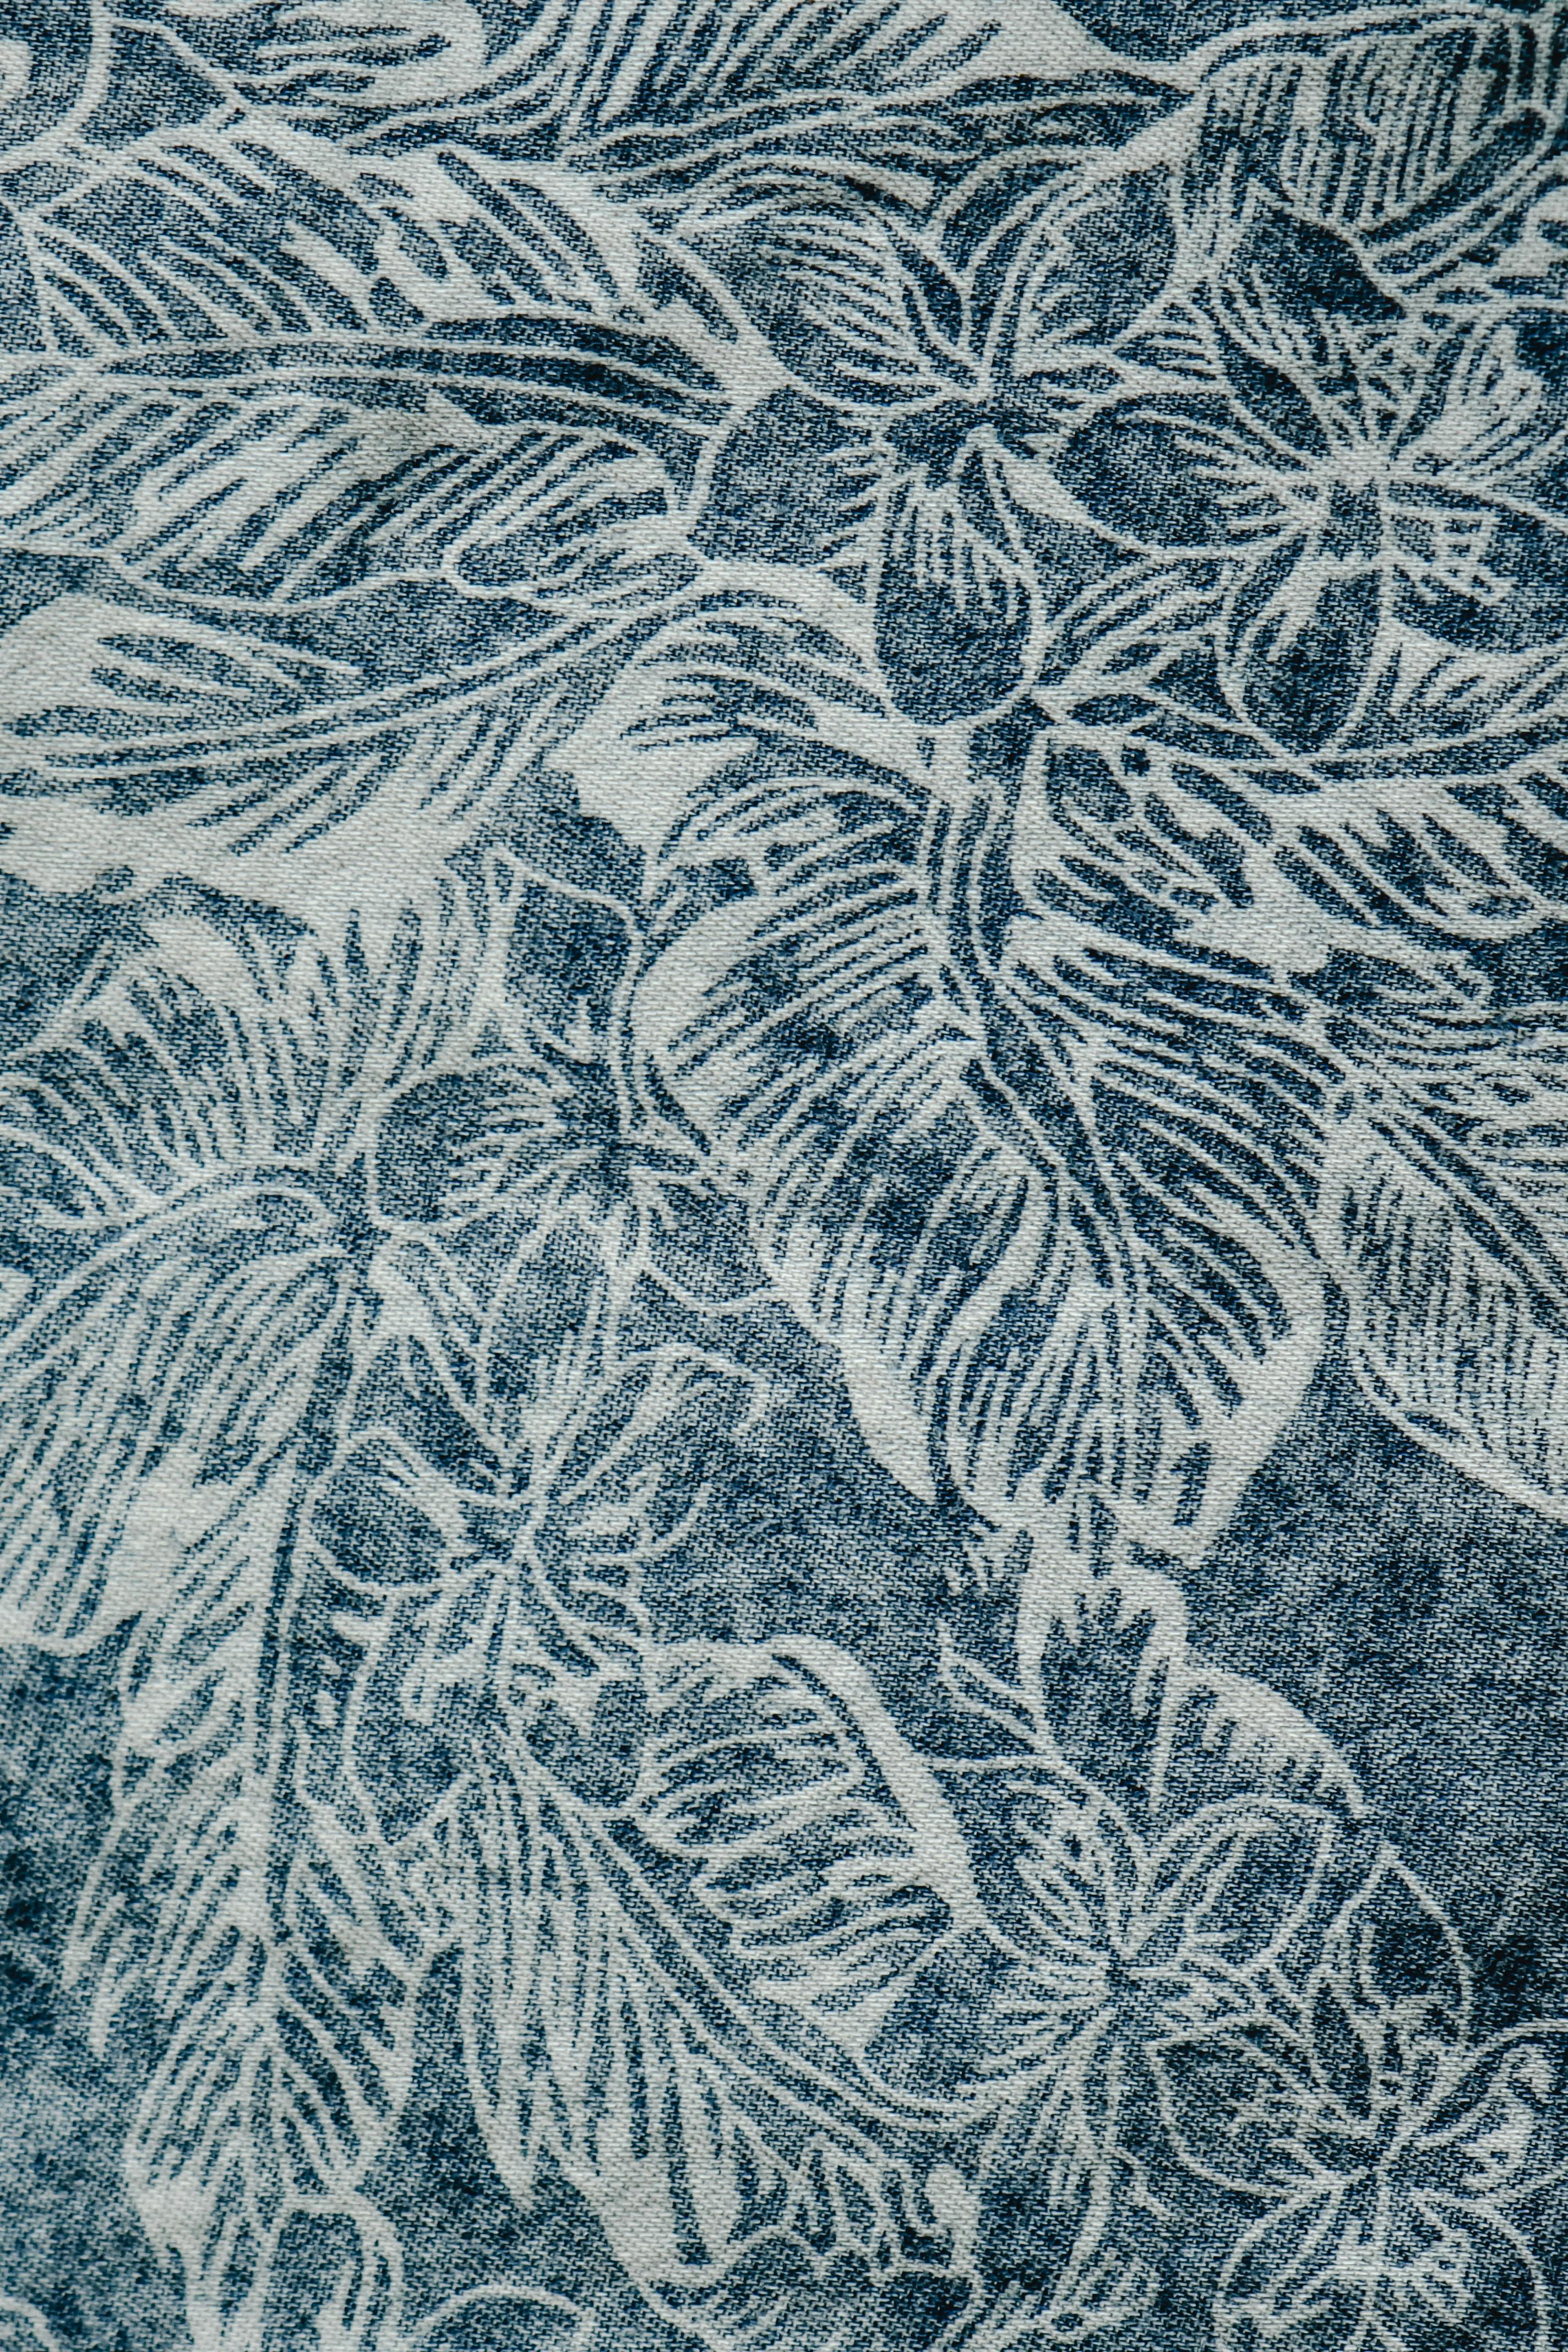 Black on White Floral Print Fabric Texture Picture, Free Photograph